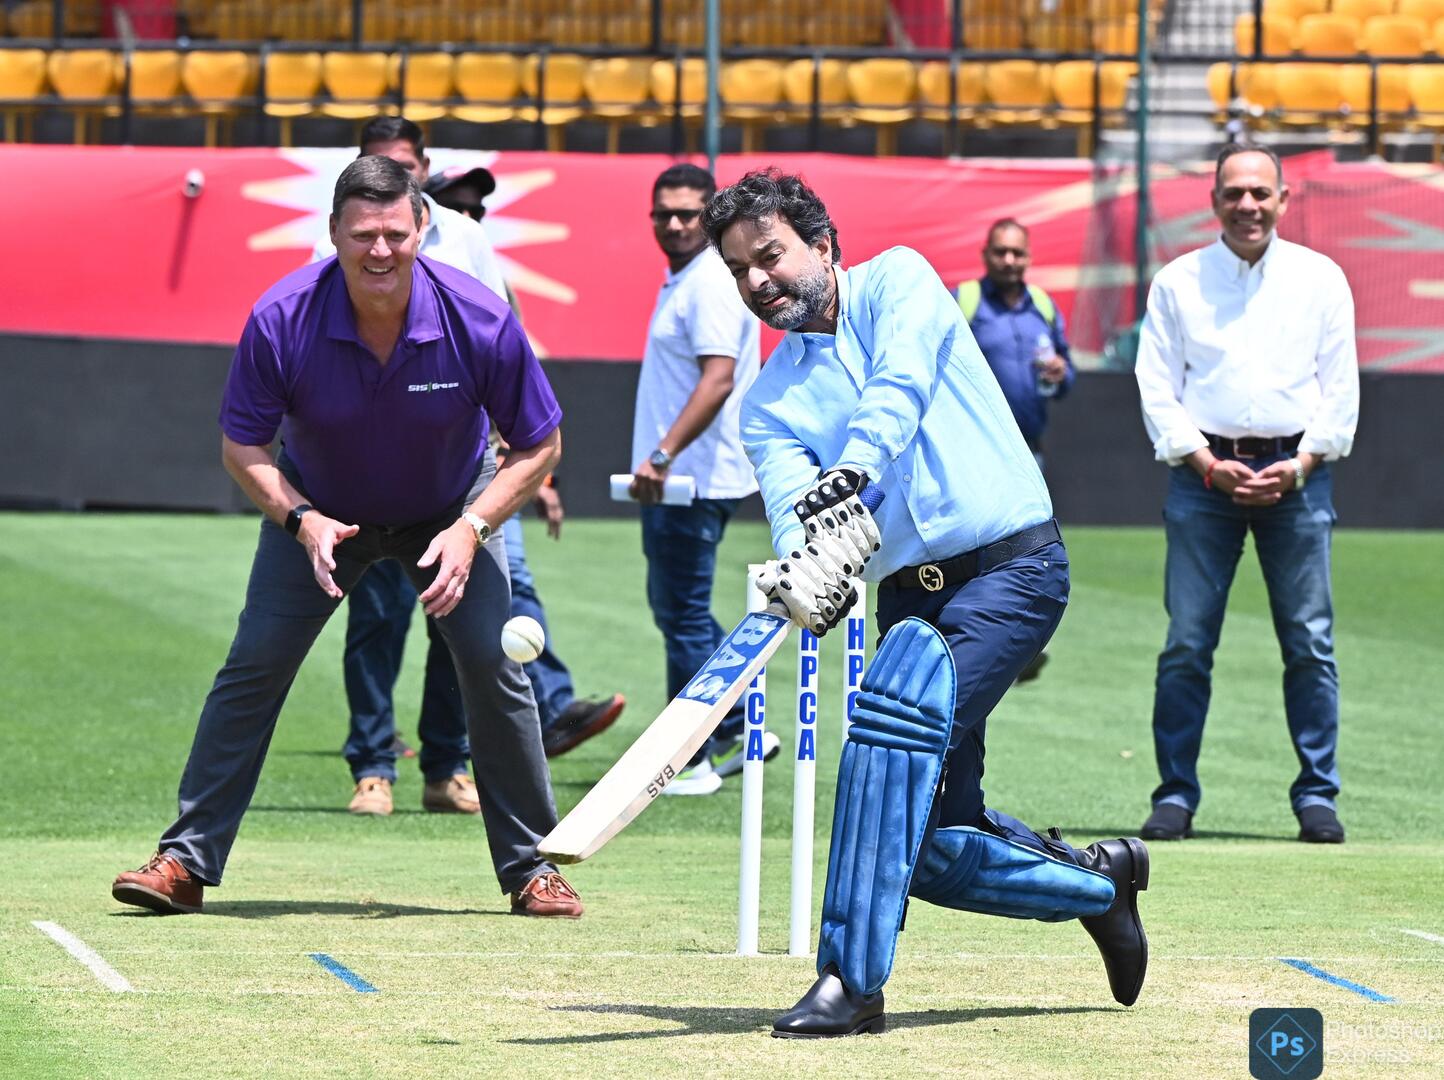 IPL CHAIRMAN ARUN DHUMAL BATS FOR HYBRID PITCHES IN INDIA FOLLOWING THE INSTALLATION OF INDIA’S FIRST HYBRID CRICKET PITCH AT HPCA, DHARAMSHALA